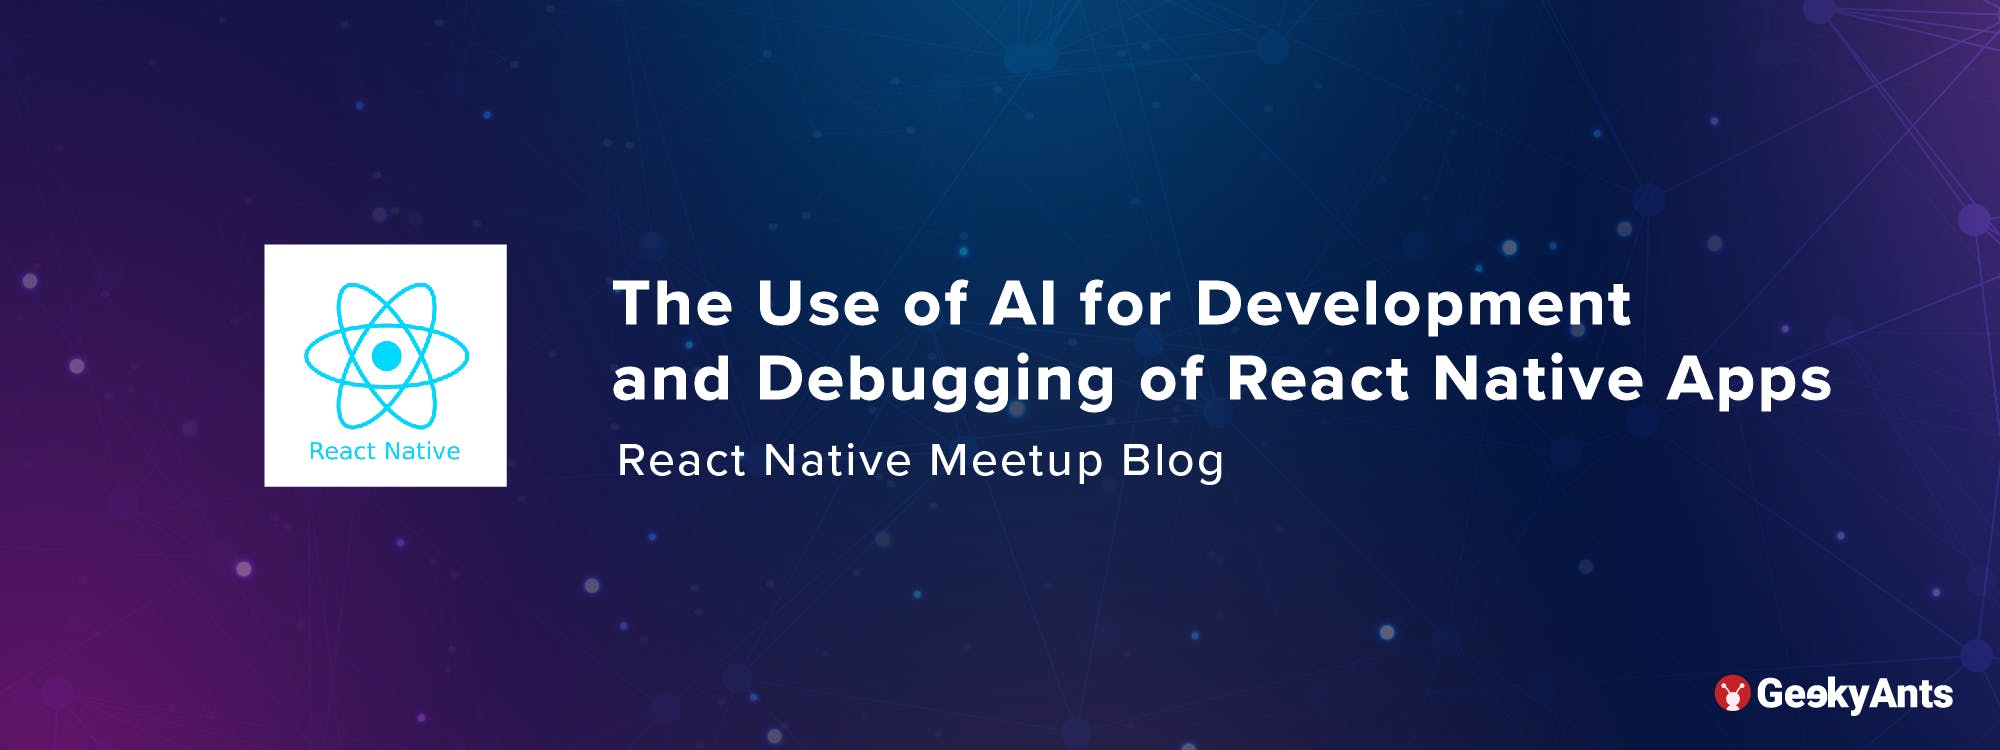 The Use of AI for Development and Debugging of React Native Apps